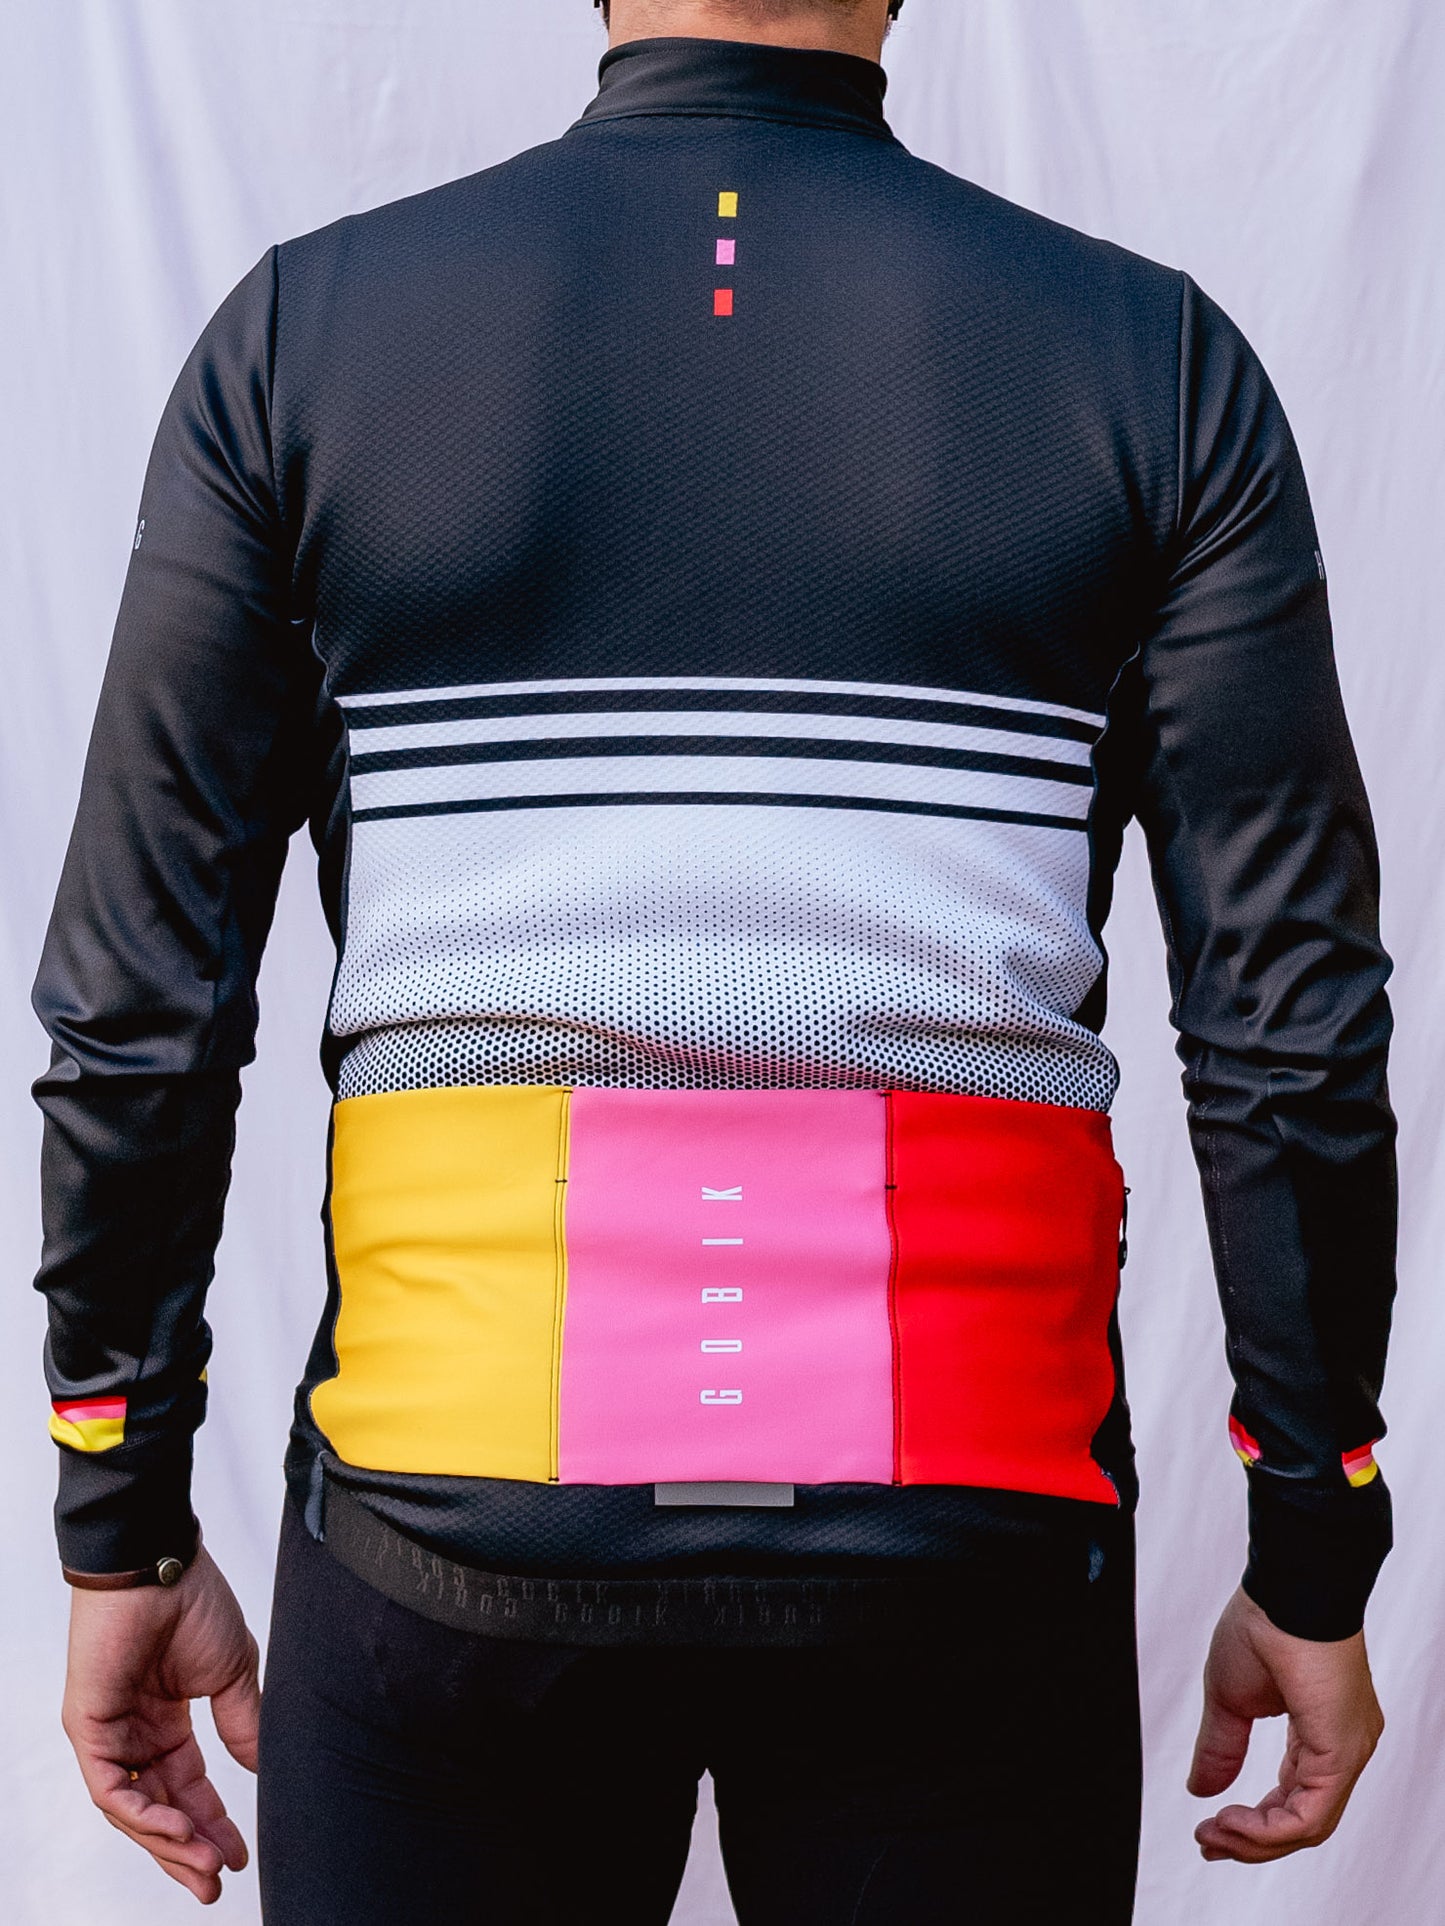 GRUPPETTO THERMAL JACKET - for the roughest days out